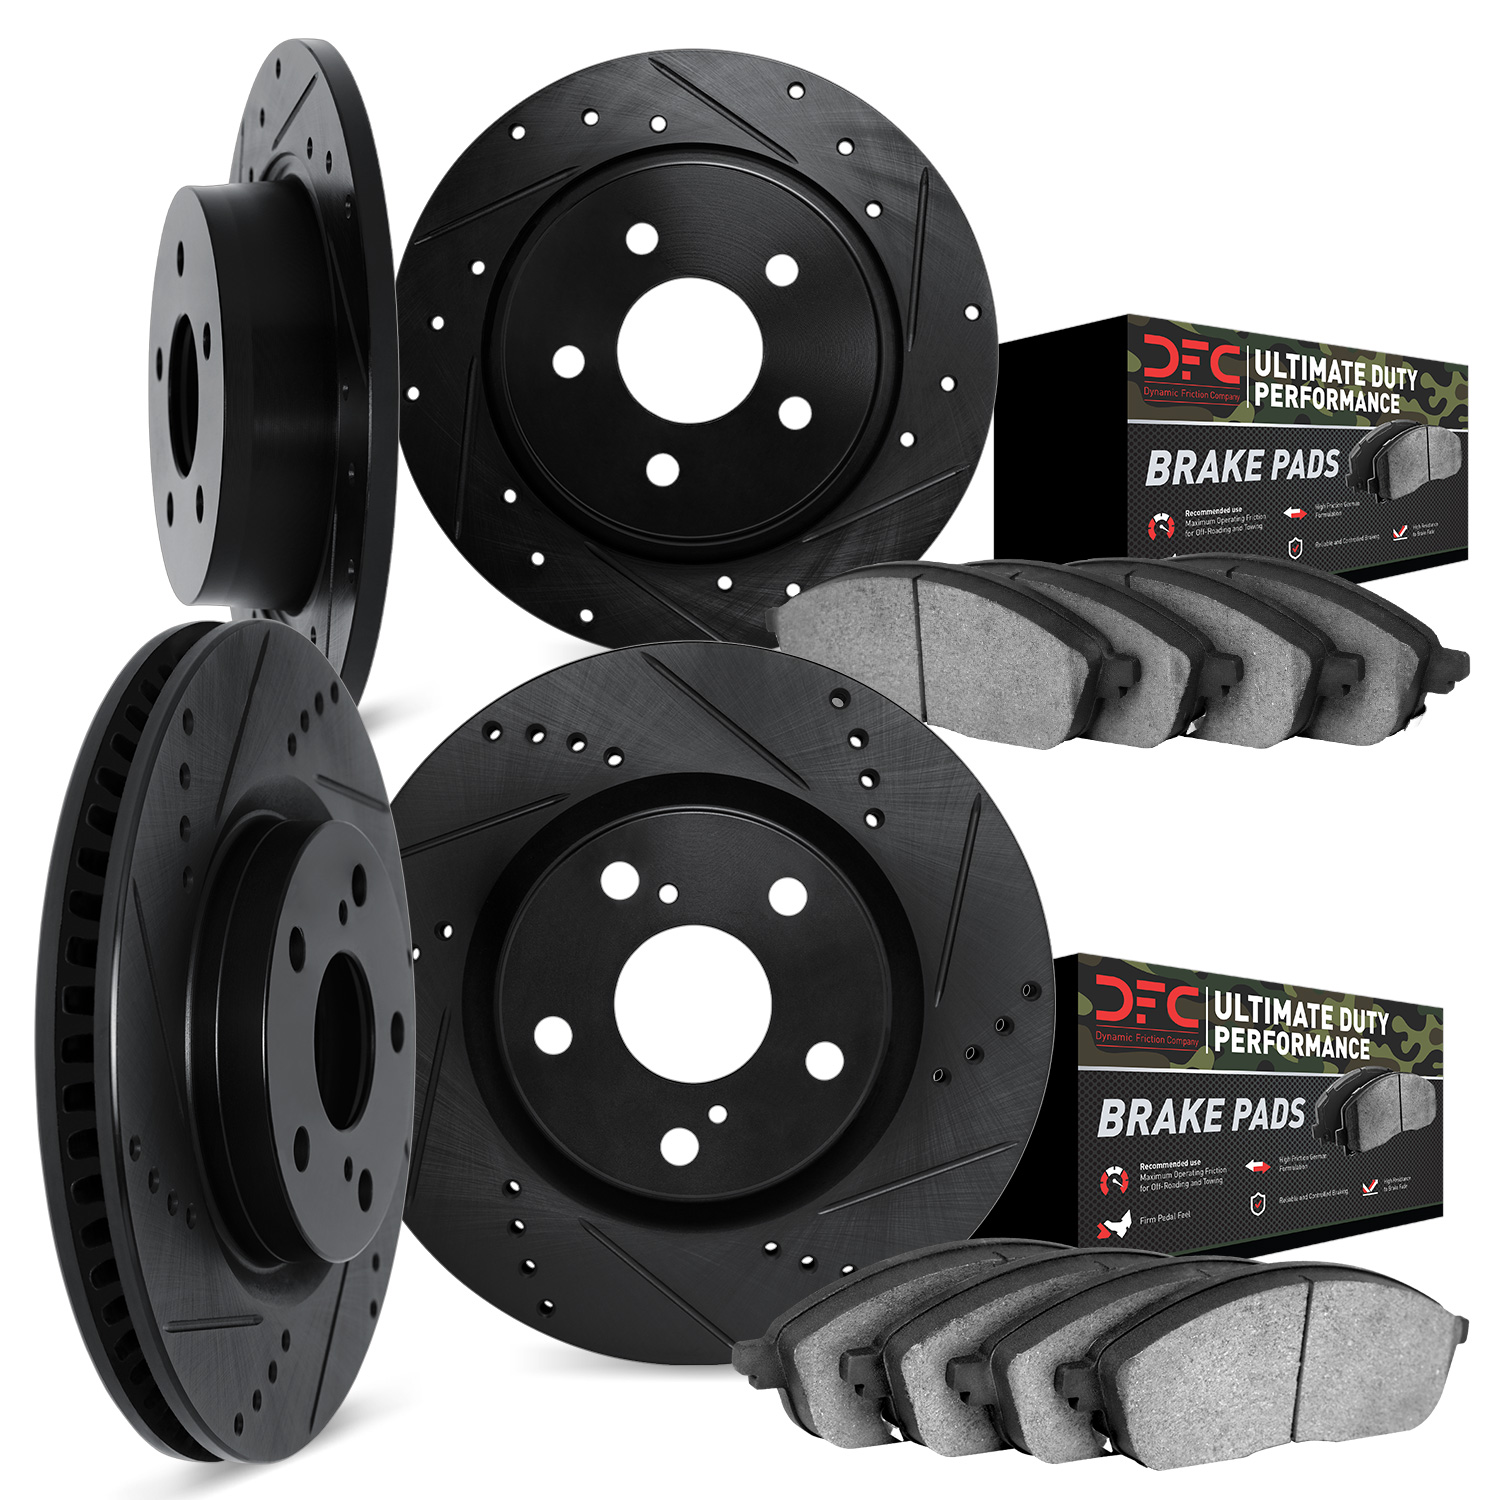 8404-42011 Drilled/Slotted Brake Rotors with Ultimate-Duty Brake Pads Kit [Black], 1993-1994 Mopar, Position: Front and Rear